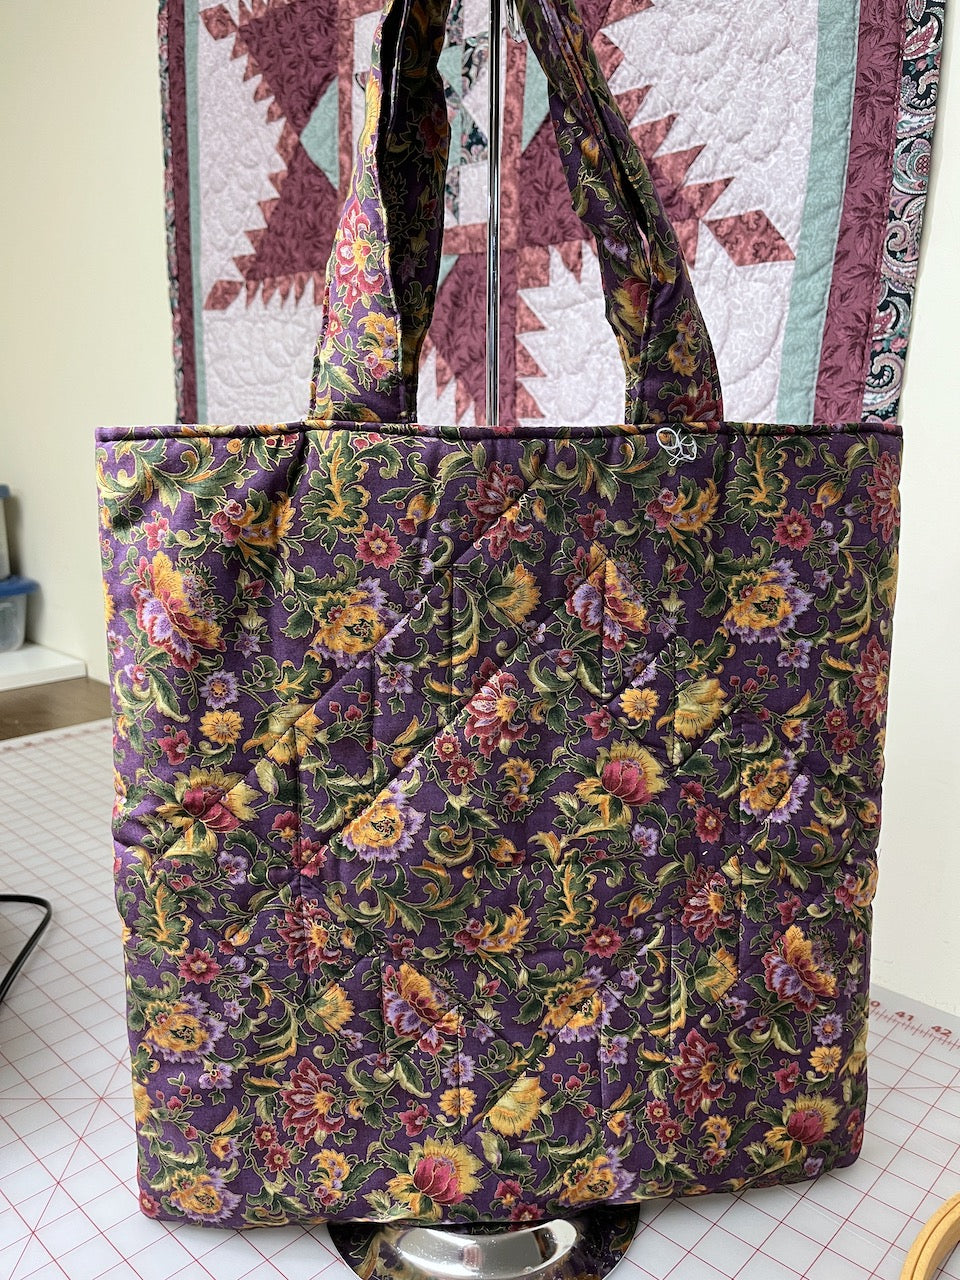 Dove Tote or Country Tulip Tote - Free Patterns -  Instant Download PDF